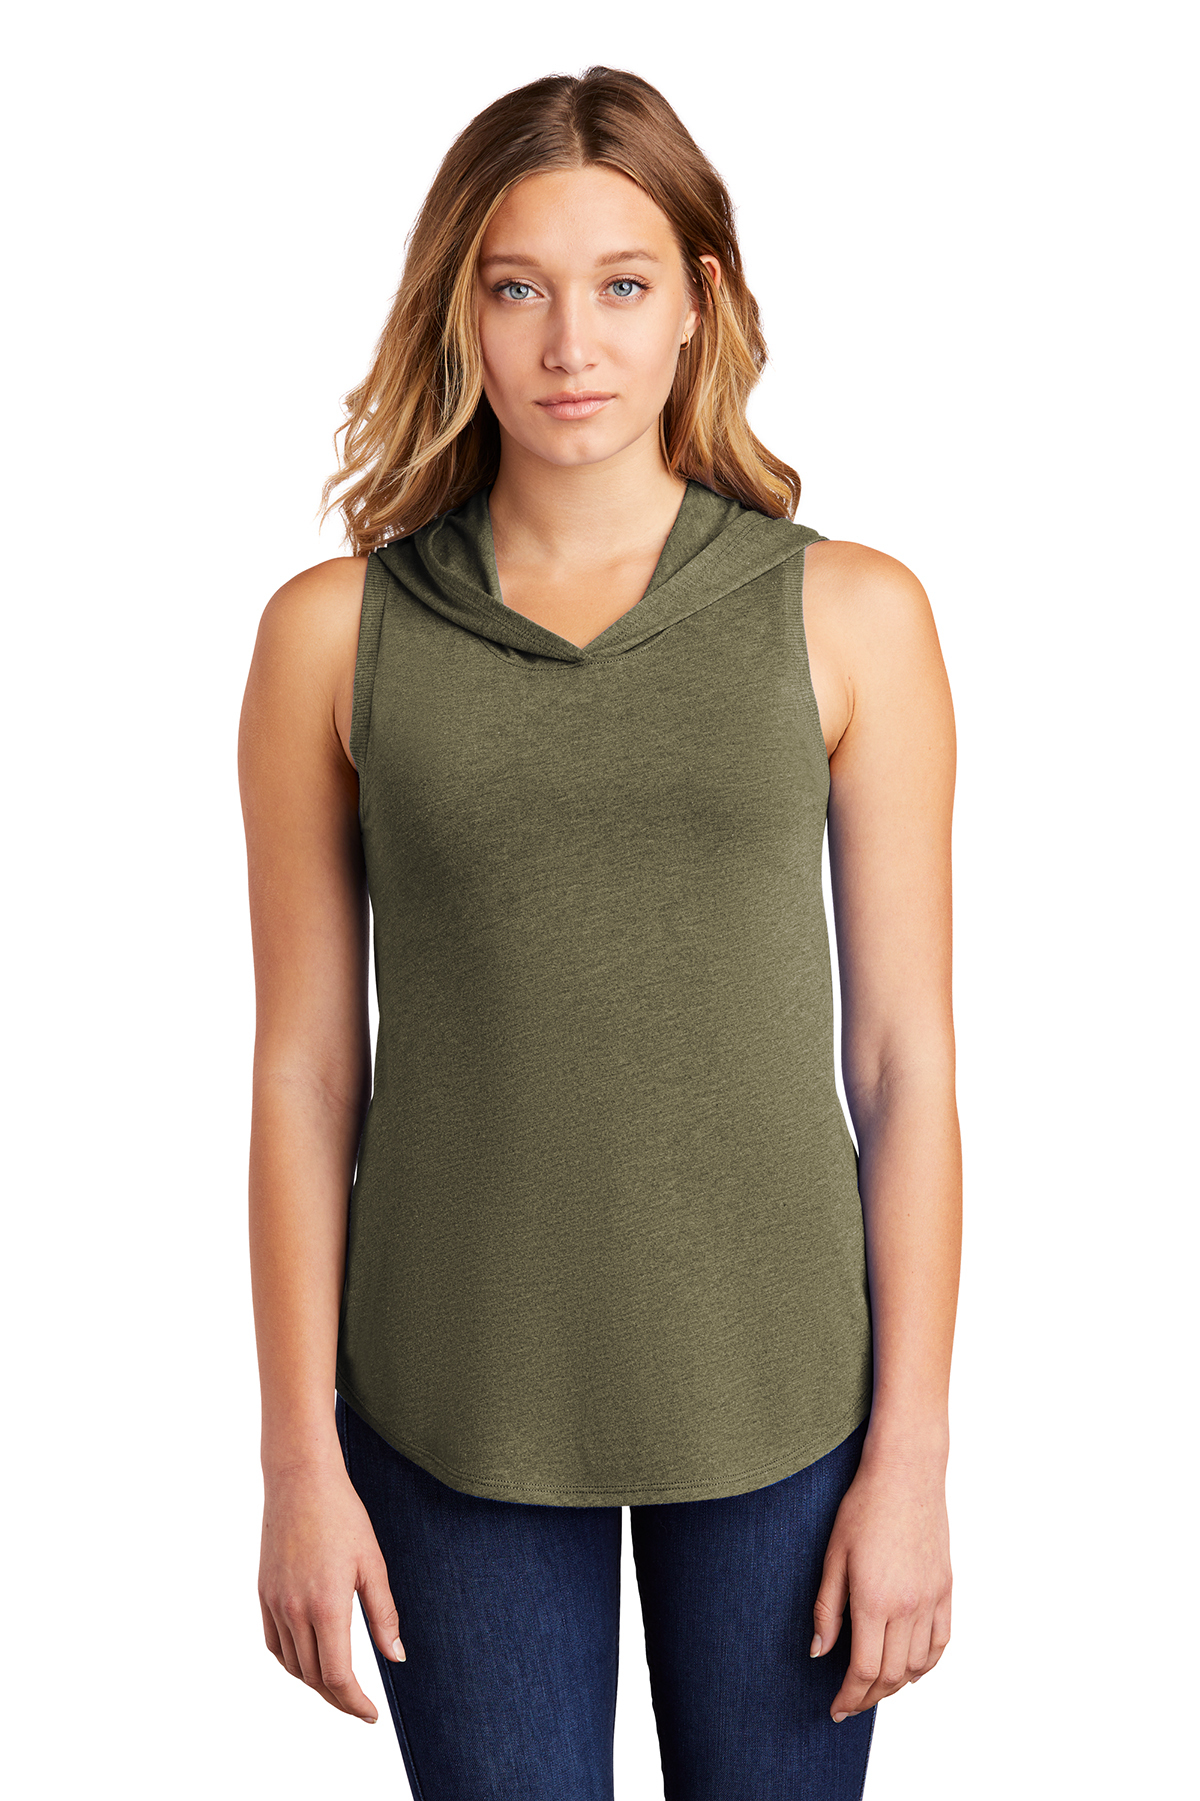 District DT1375 - Women's Perfect Tri Sleeveless Hoodie